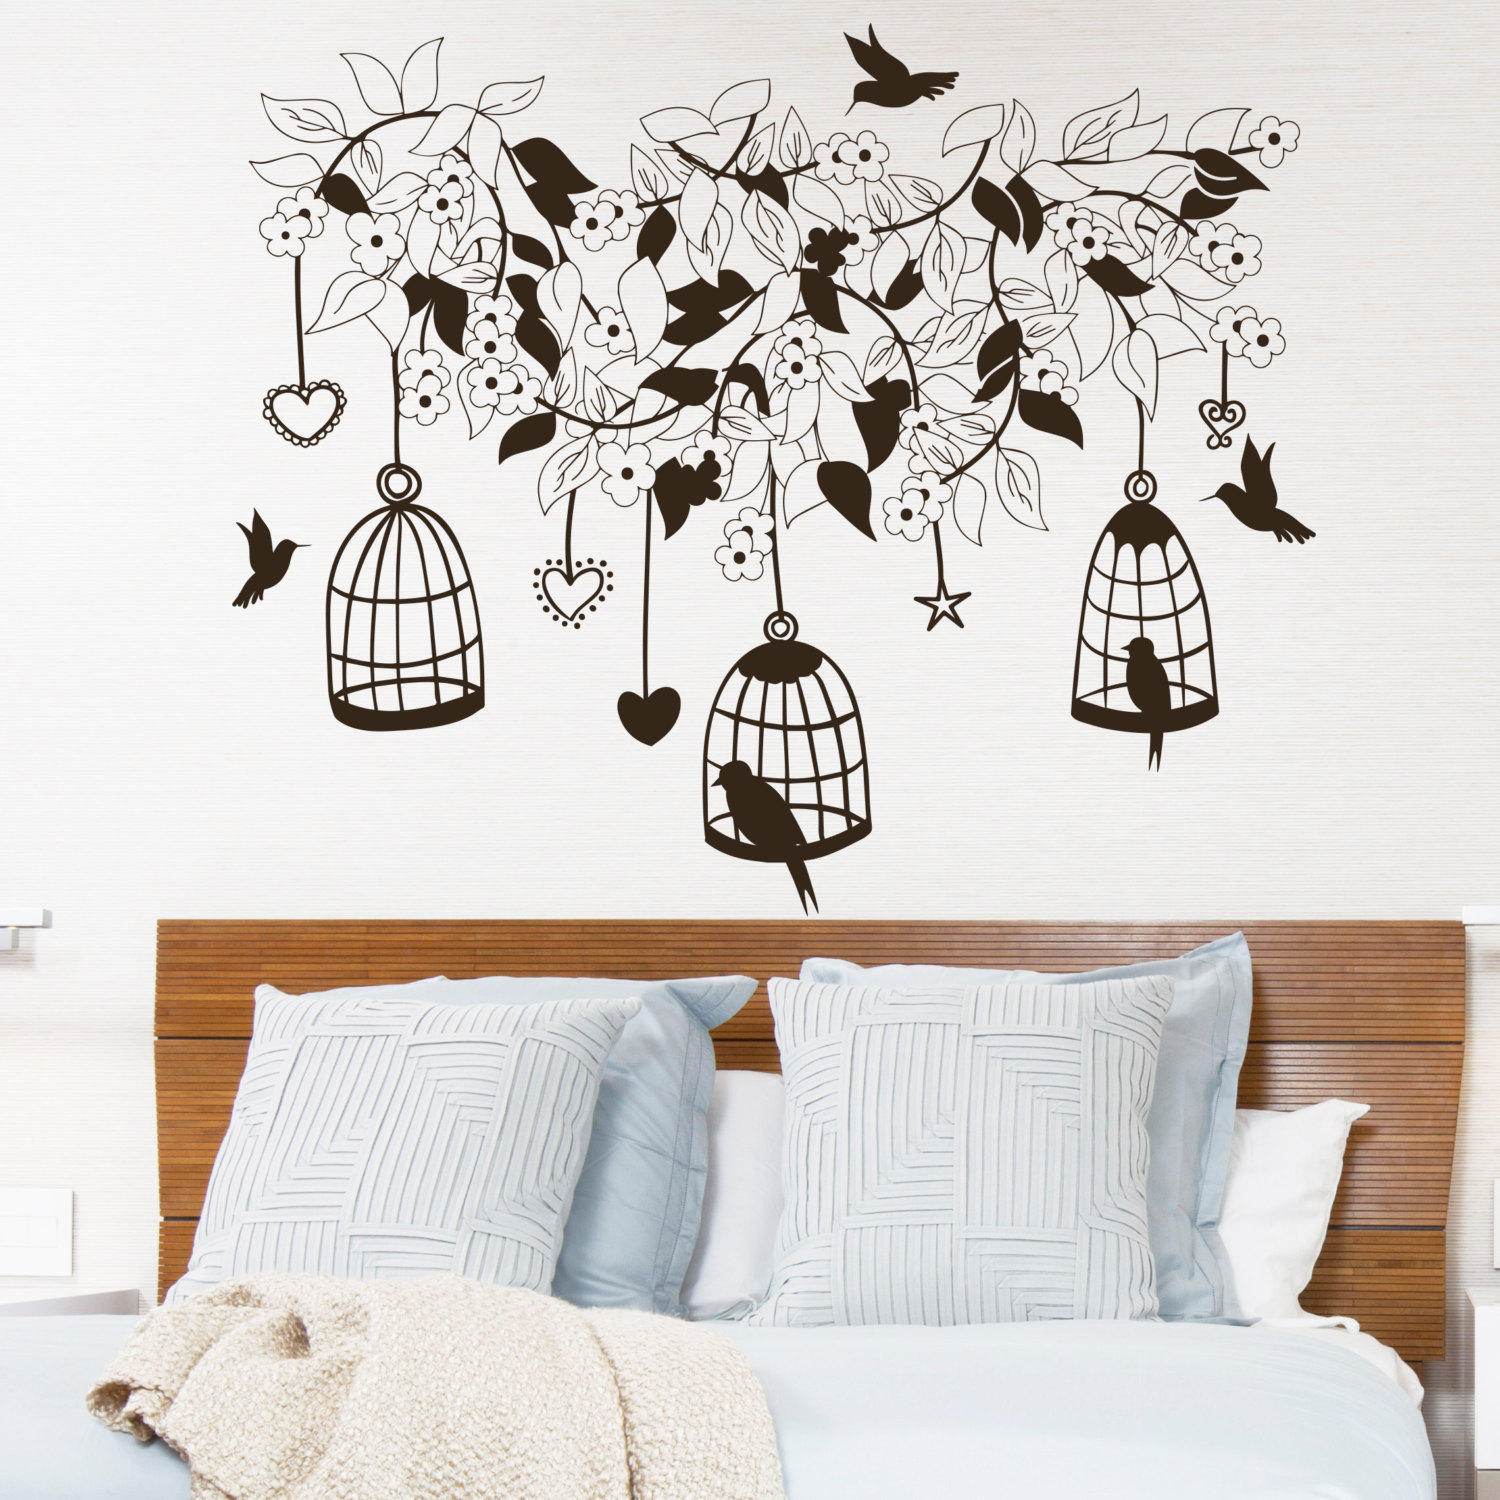 Shop Decorative Bird Tree On Wanelo Wall Decal Flowers Birds In Cage ...